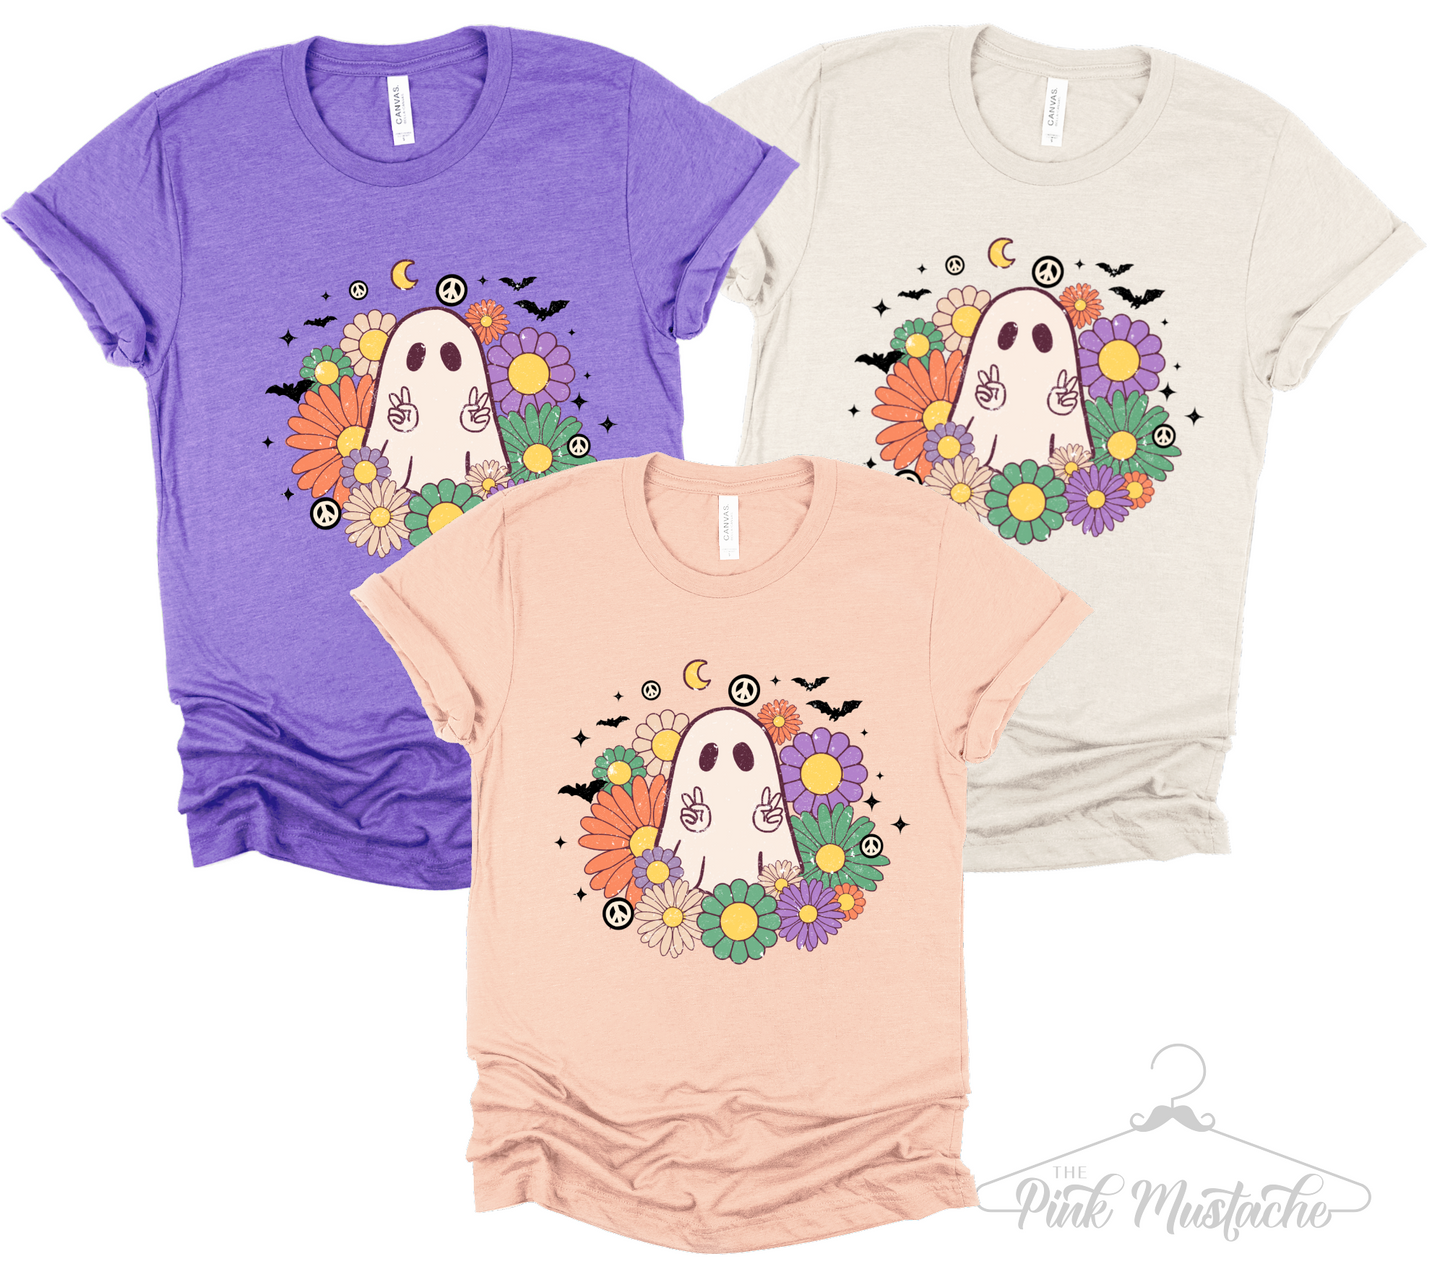 Floral Hippie Ghost Tee/ Halloween Shirt/ Softstyle Tee/ Toddler, Youth And Adult Sizes Available